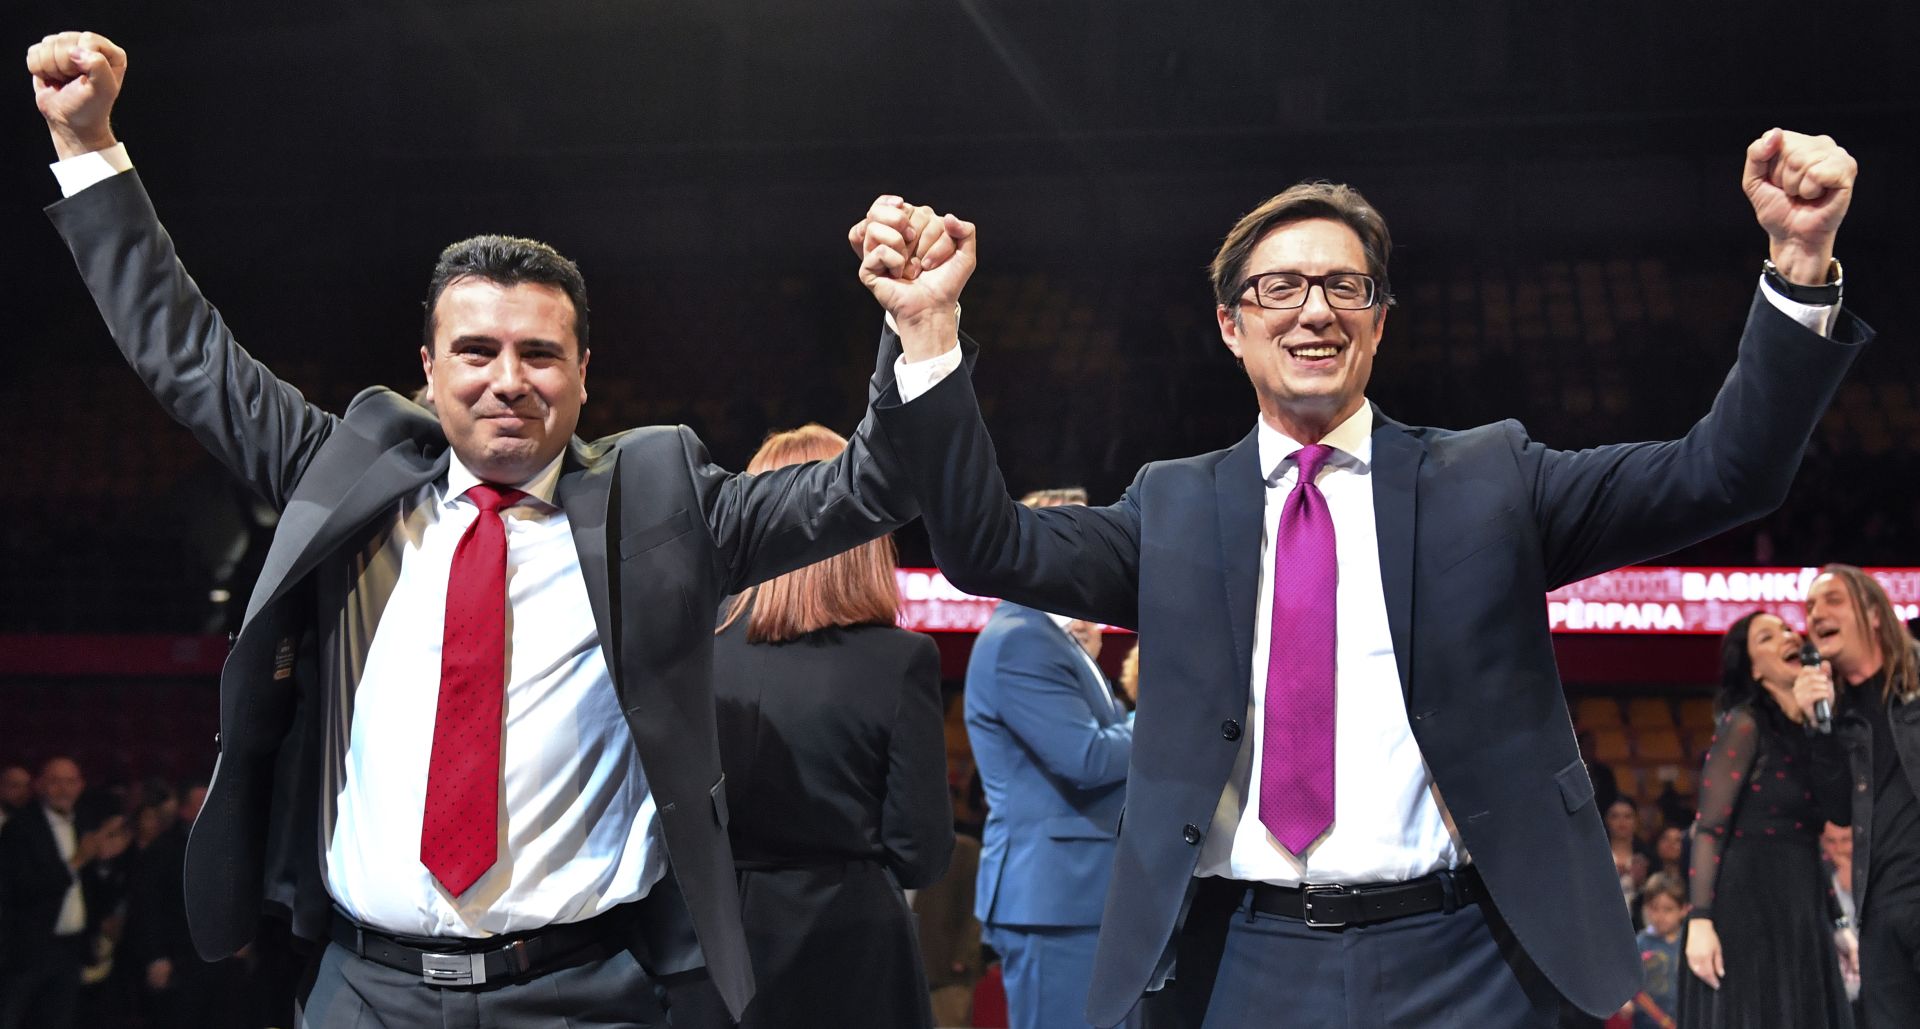 epa07483515 The Prime Minister and leader of the ruling Social Democrats, Zoran Zaev (L) and Stevo Pendarovski (R) presidential candidate greet their supporters on a party convention in Skopje, North Macedonia, 03 April 2019. The coalition between the ruling SDSM and DUI will run in the upcoming Presidential election with Professor Stevo Pendarovski who is a candidate for the President of the Republic of North Macedonia for the second time. The first round of the election is scheduled for 21 April 2019.  EPA/GEORGI LICOVSKI